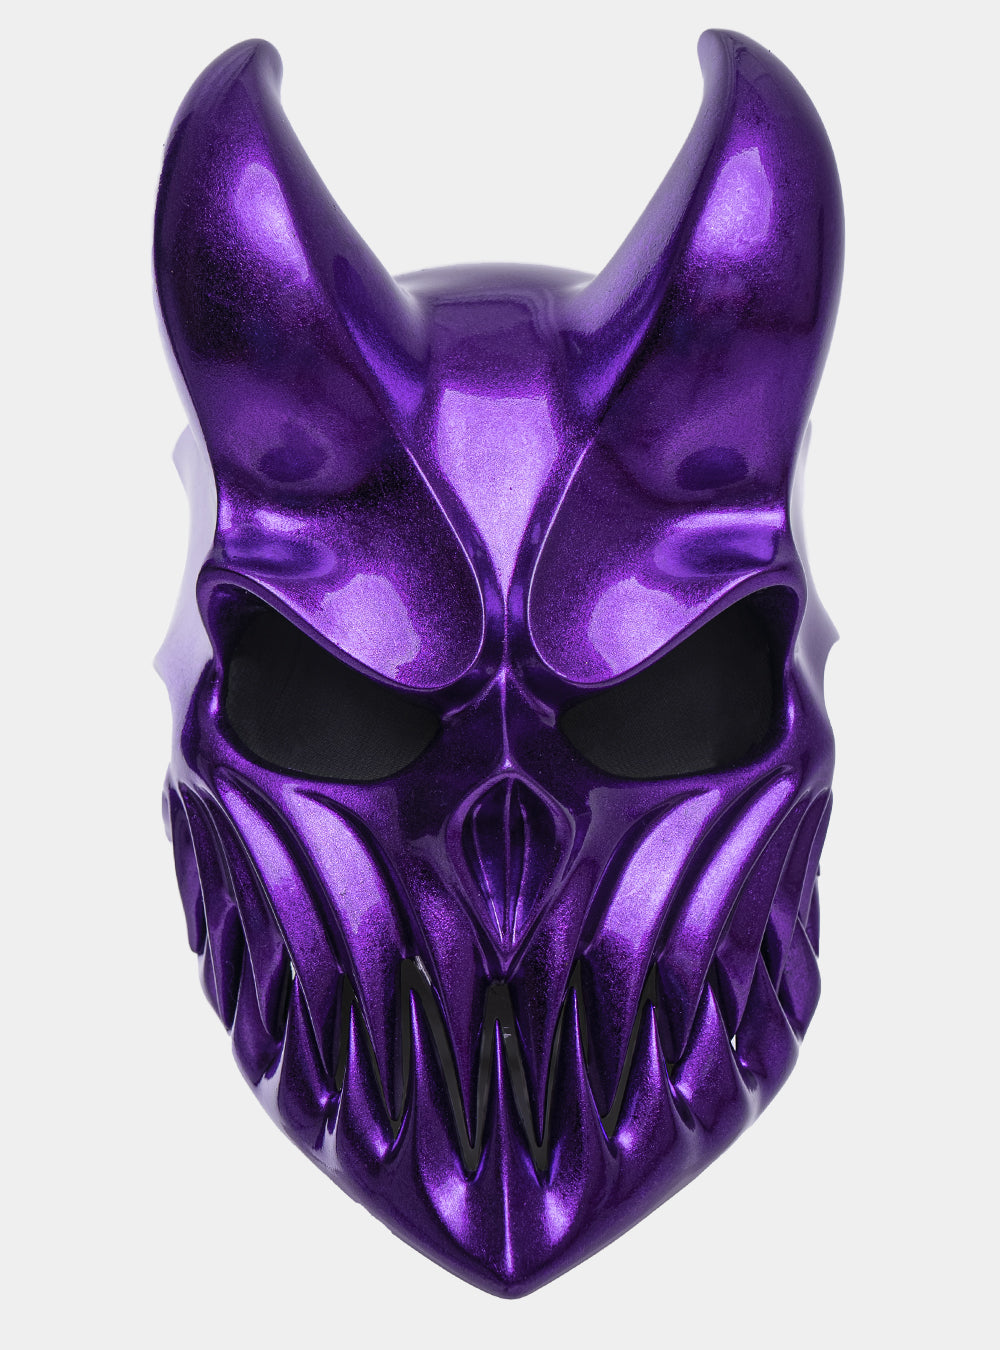 PURPLE MASK “KID OF DARKNESS” by ALEX TERRIBLE (SLAUGHTER PREVAIL) - buy KOD mask Alex Terrible store – alexterrible